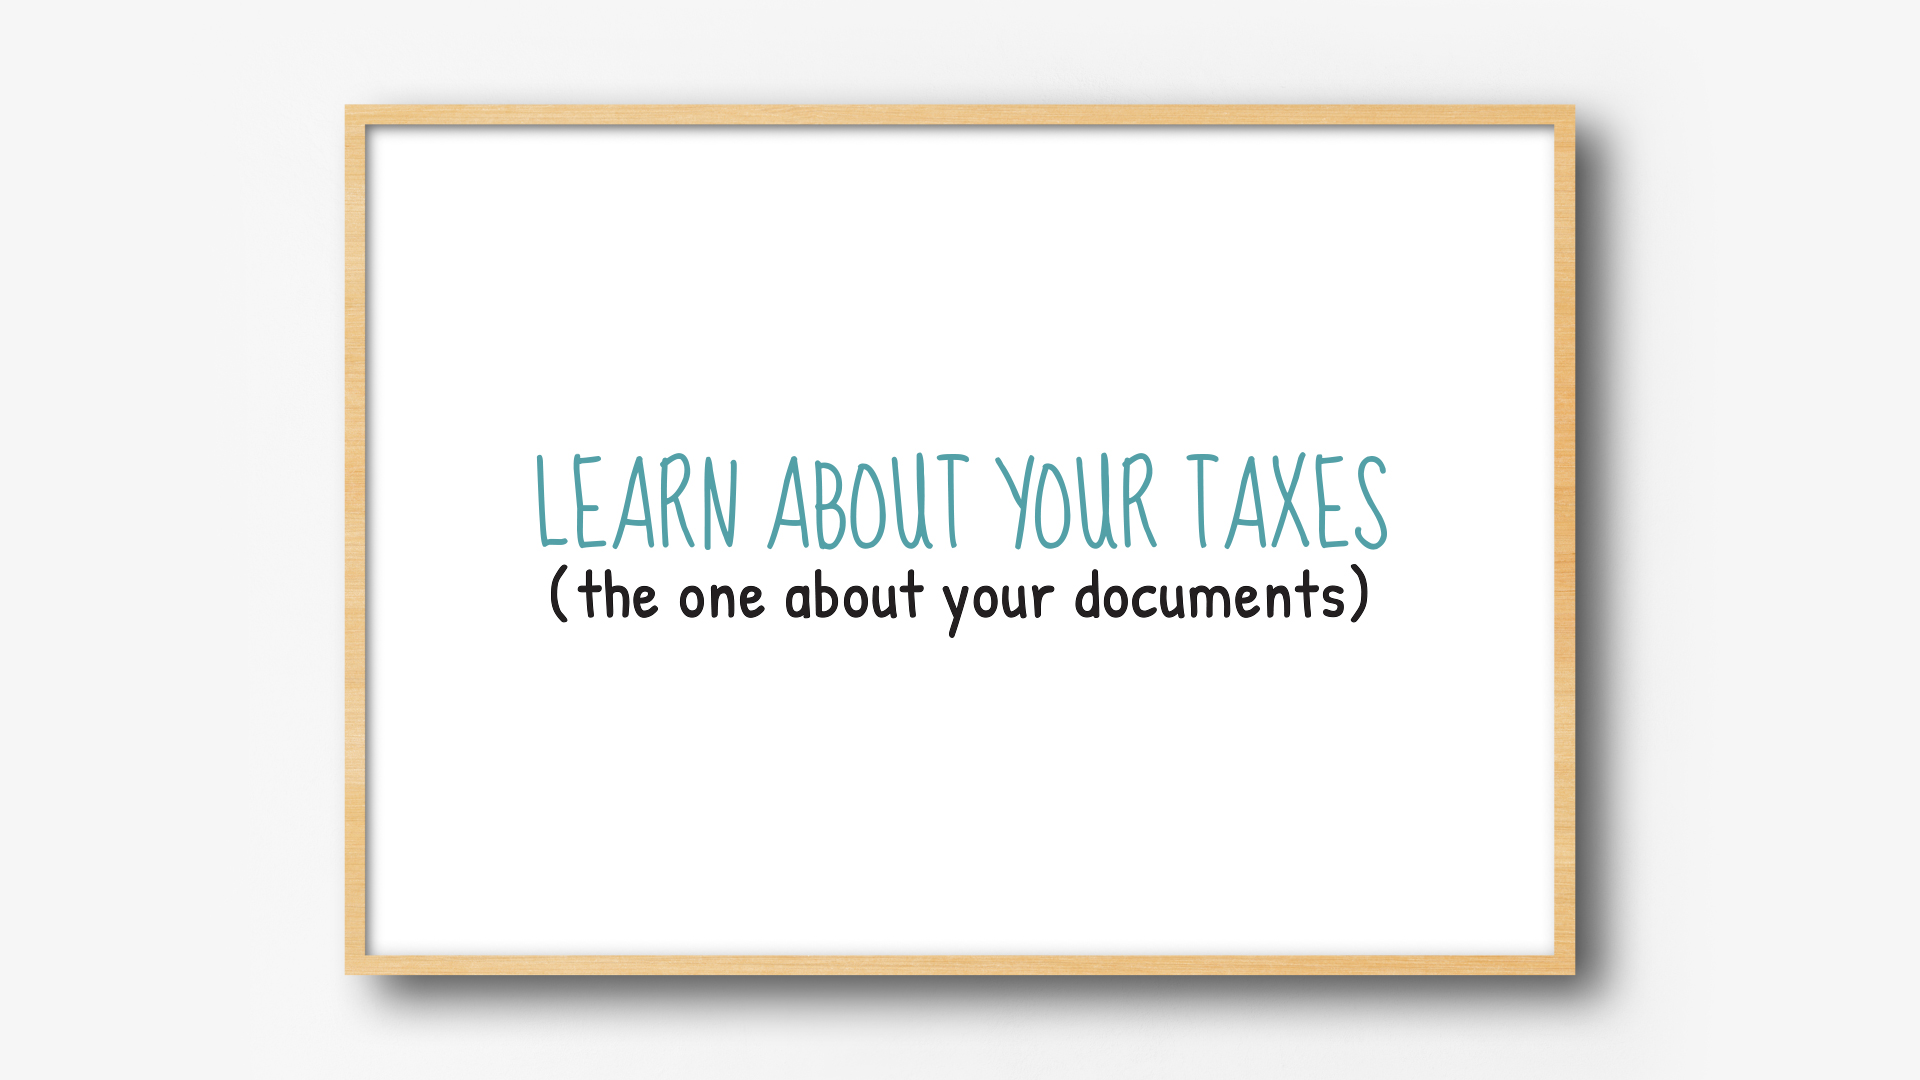 Whiteboard - learn about your taxes - documents